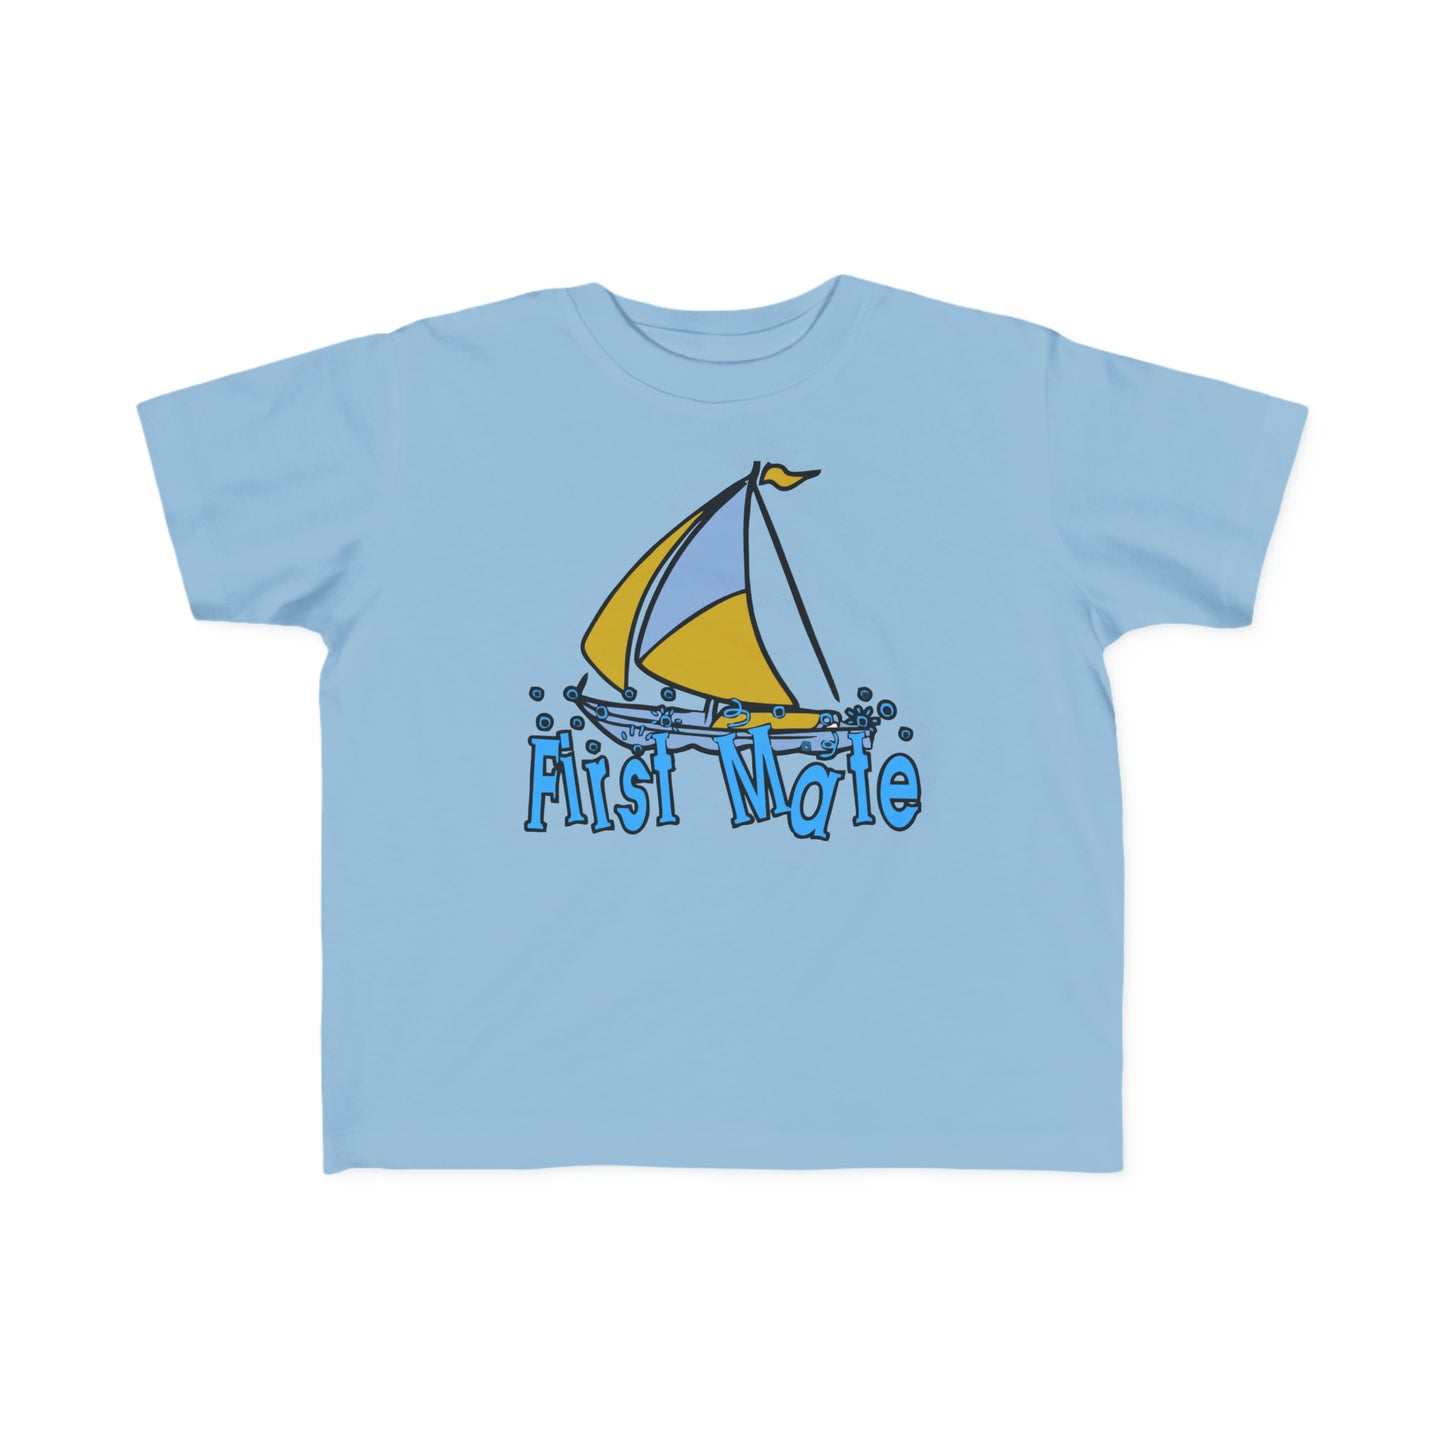 First Mate Toddler T-shirt, Little Sailor Tee, Sailboat Design, Sailor Boy Gift, Future Sailor, Gift for Sailing Enthusiasts, Shower Gift,